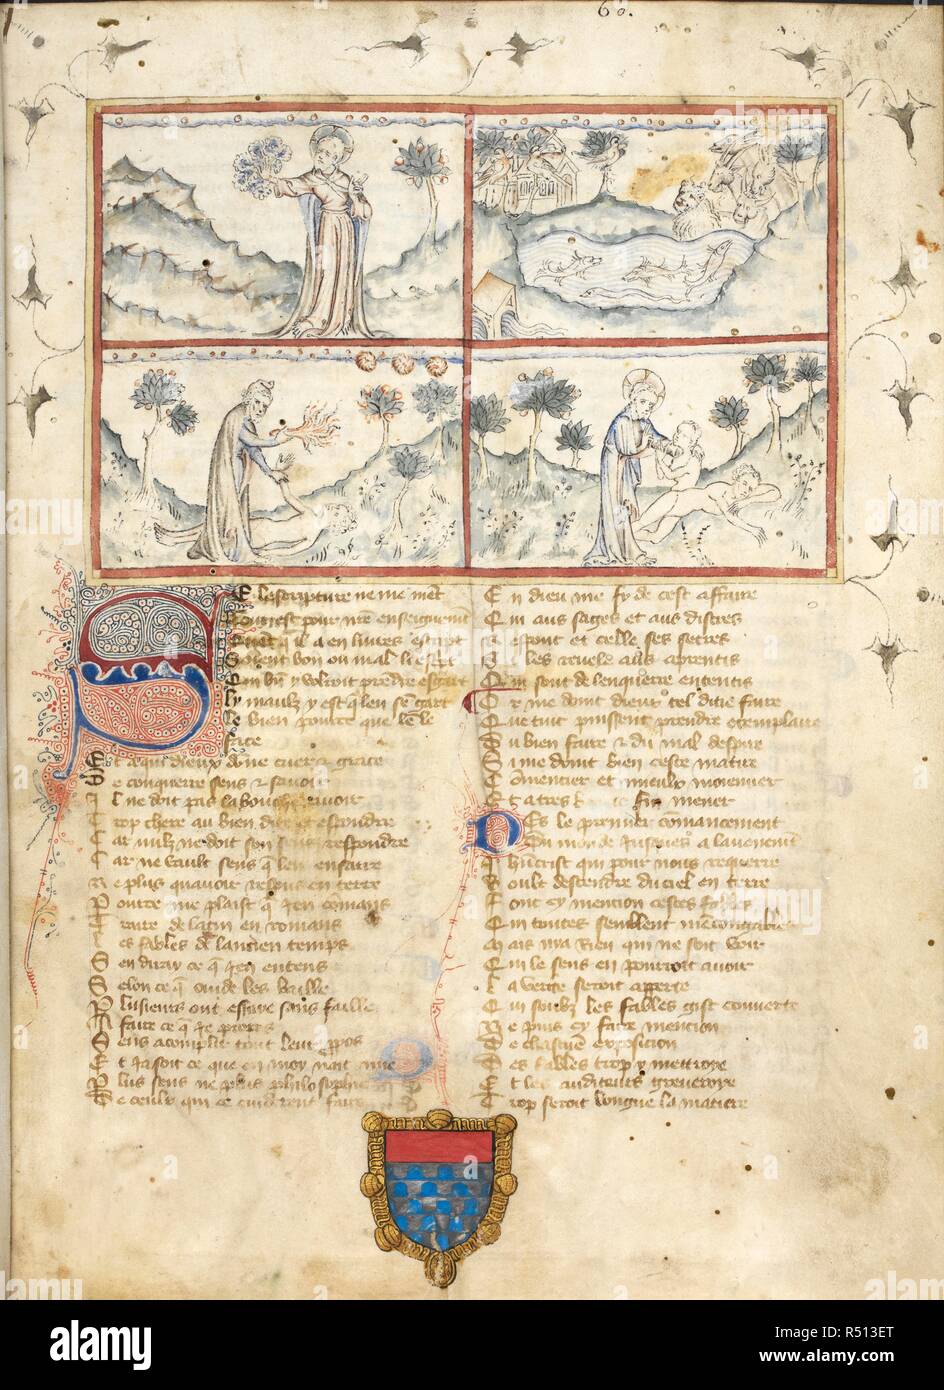 Biblical and mythological creation scenes: top left, God shapes the world from Chaos; top right, the creation of animals, birds and fish; bottom left, Prometheus animates man with a spark of divine fire; bottom left, God fashions Eve from Adam's rib. Metamorphoses. 15th century. Source: Add. 10324, f.1. Language: French. Author: Ovid, (Publius Ovidius Naso). Stock Photo